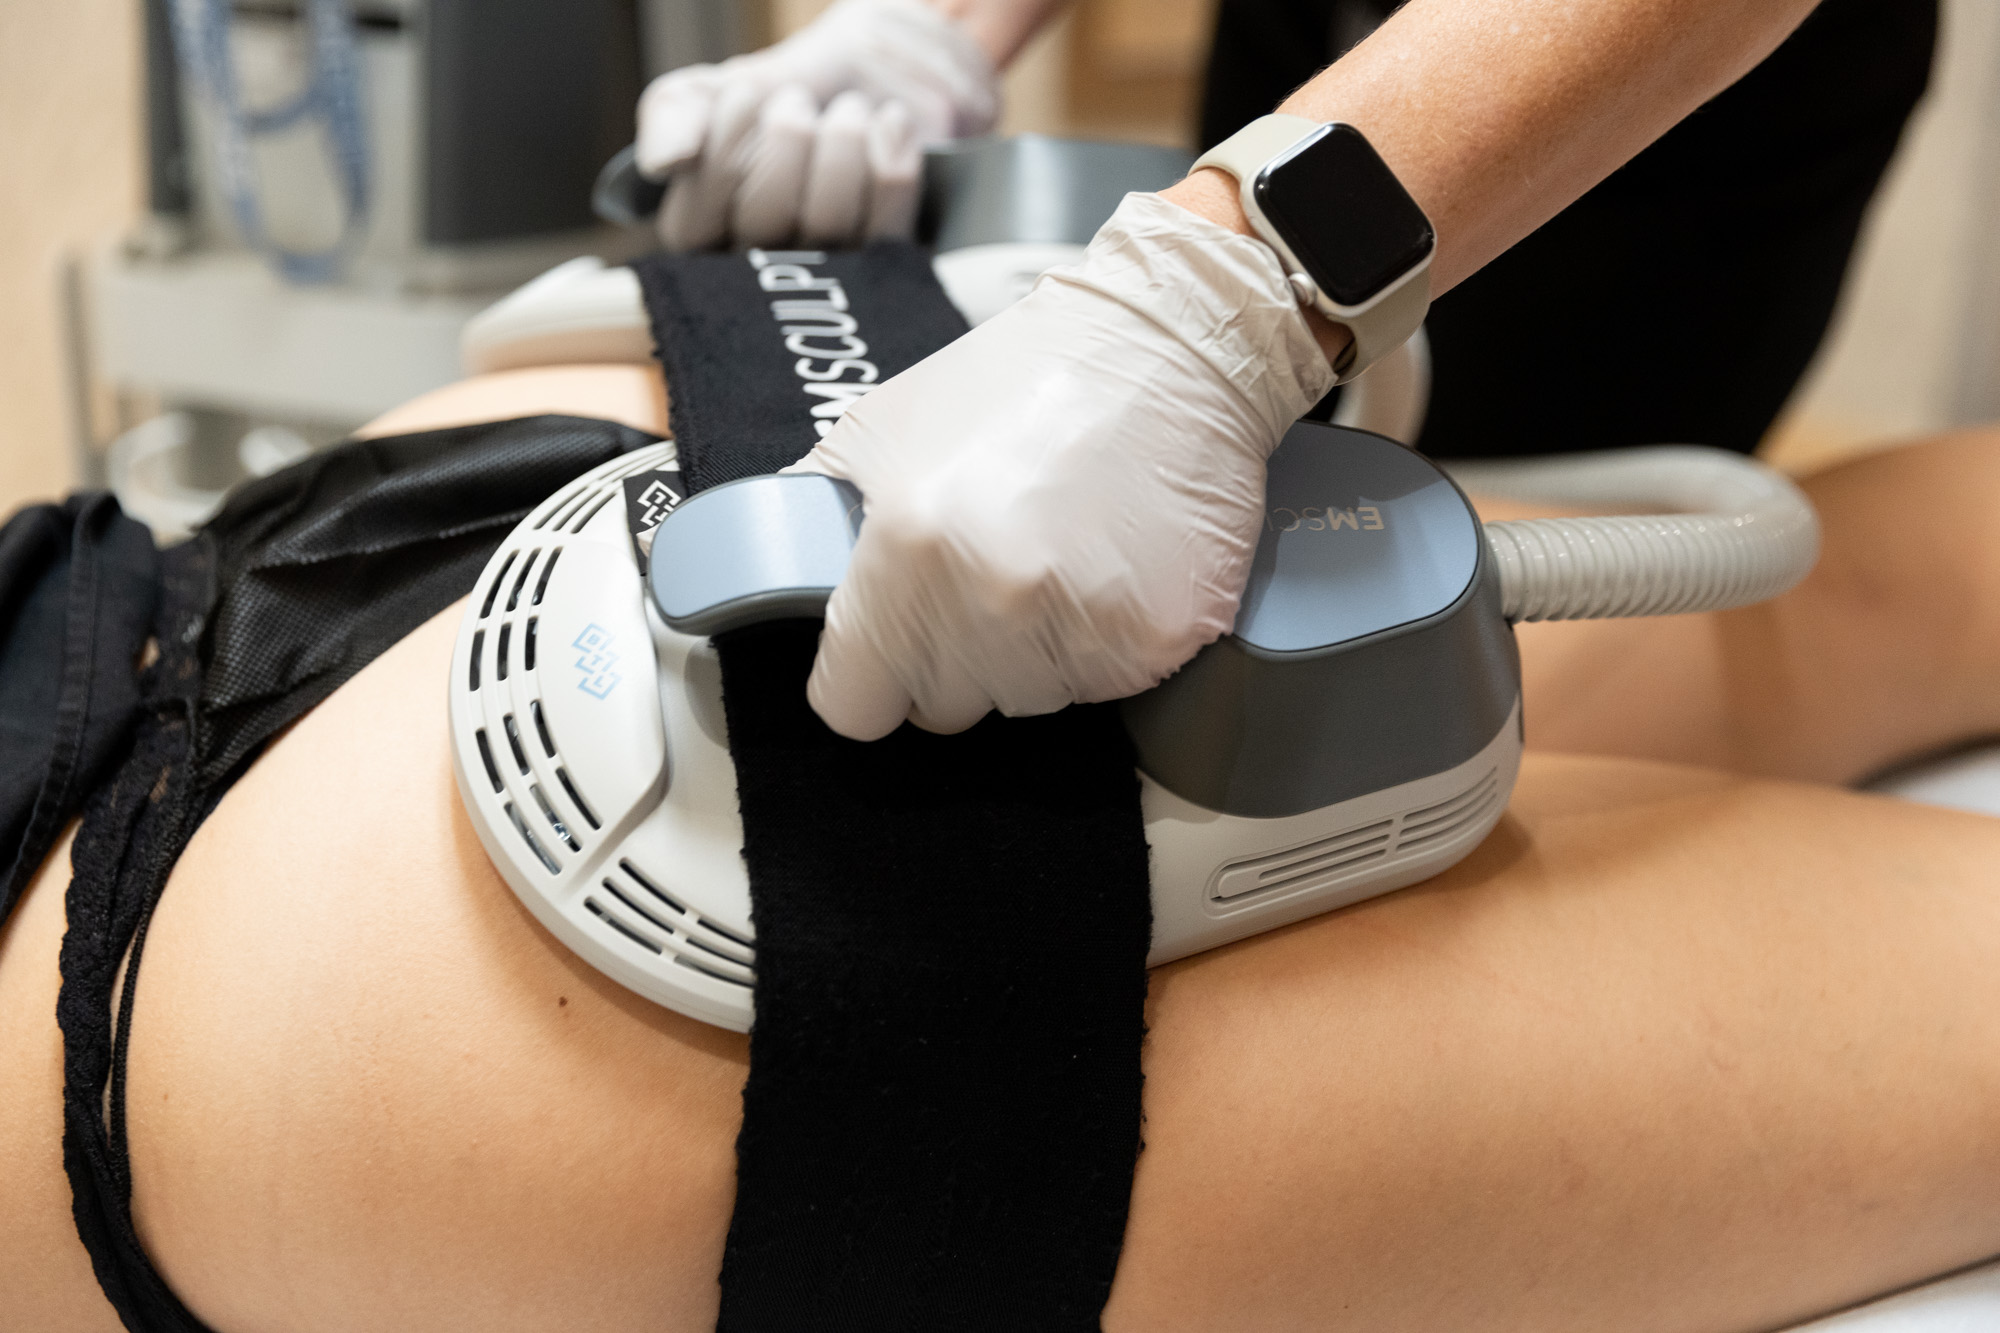 Summer Body Ready? Learn More About EMSCULPT From A Top Provider